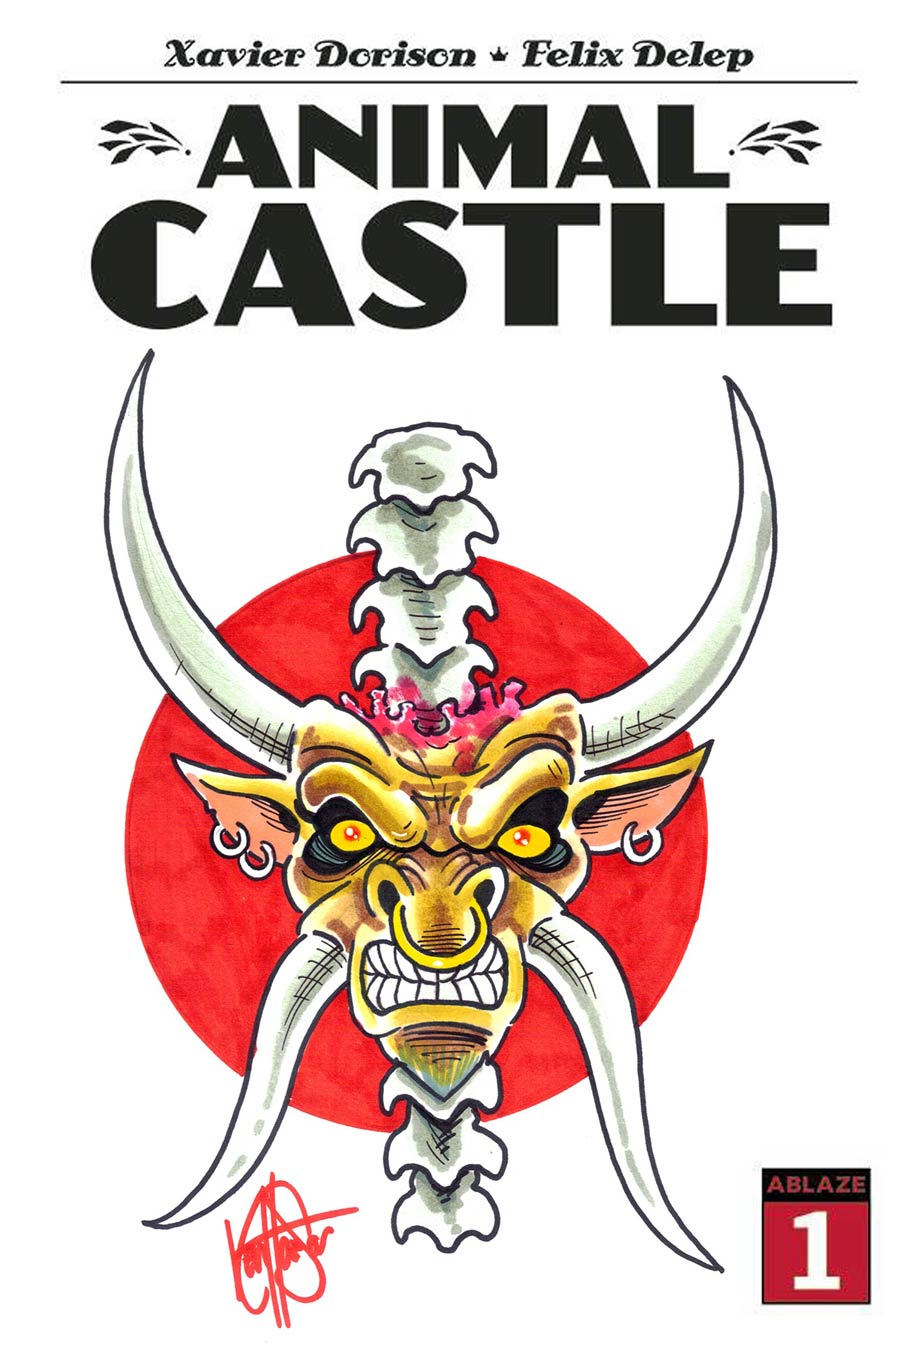 Animal Castle #1 Cover H DF Signed & Remarked By Ken Haeser With A Metal Homage Hand-Drawn Sketch